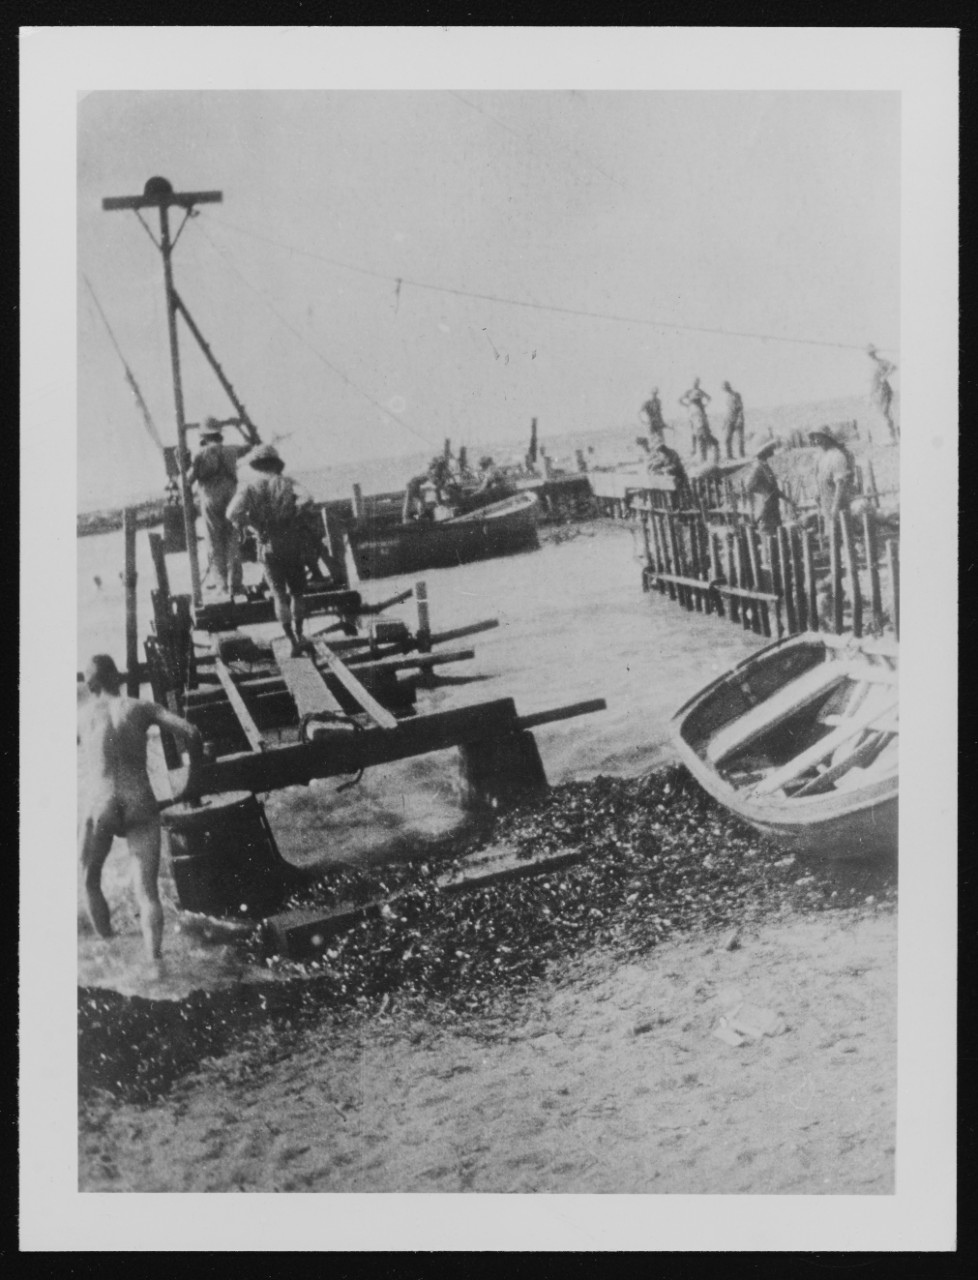 Gallipoli Campaign, building jettys at Gully Beach